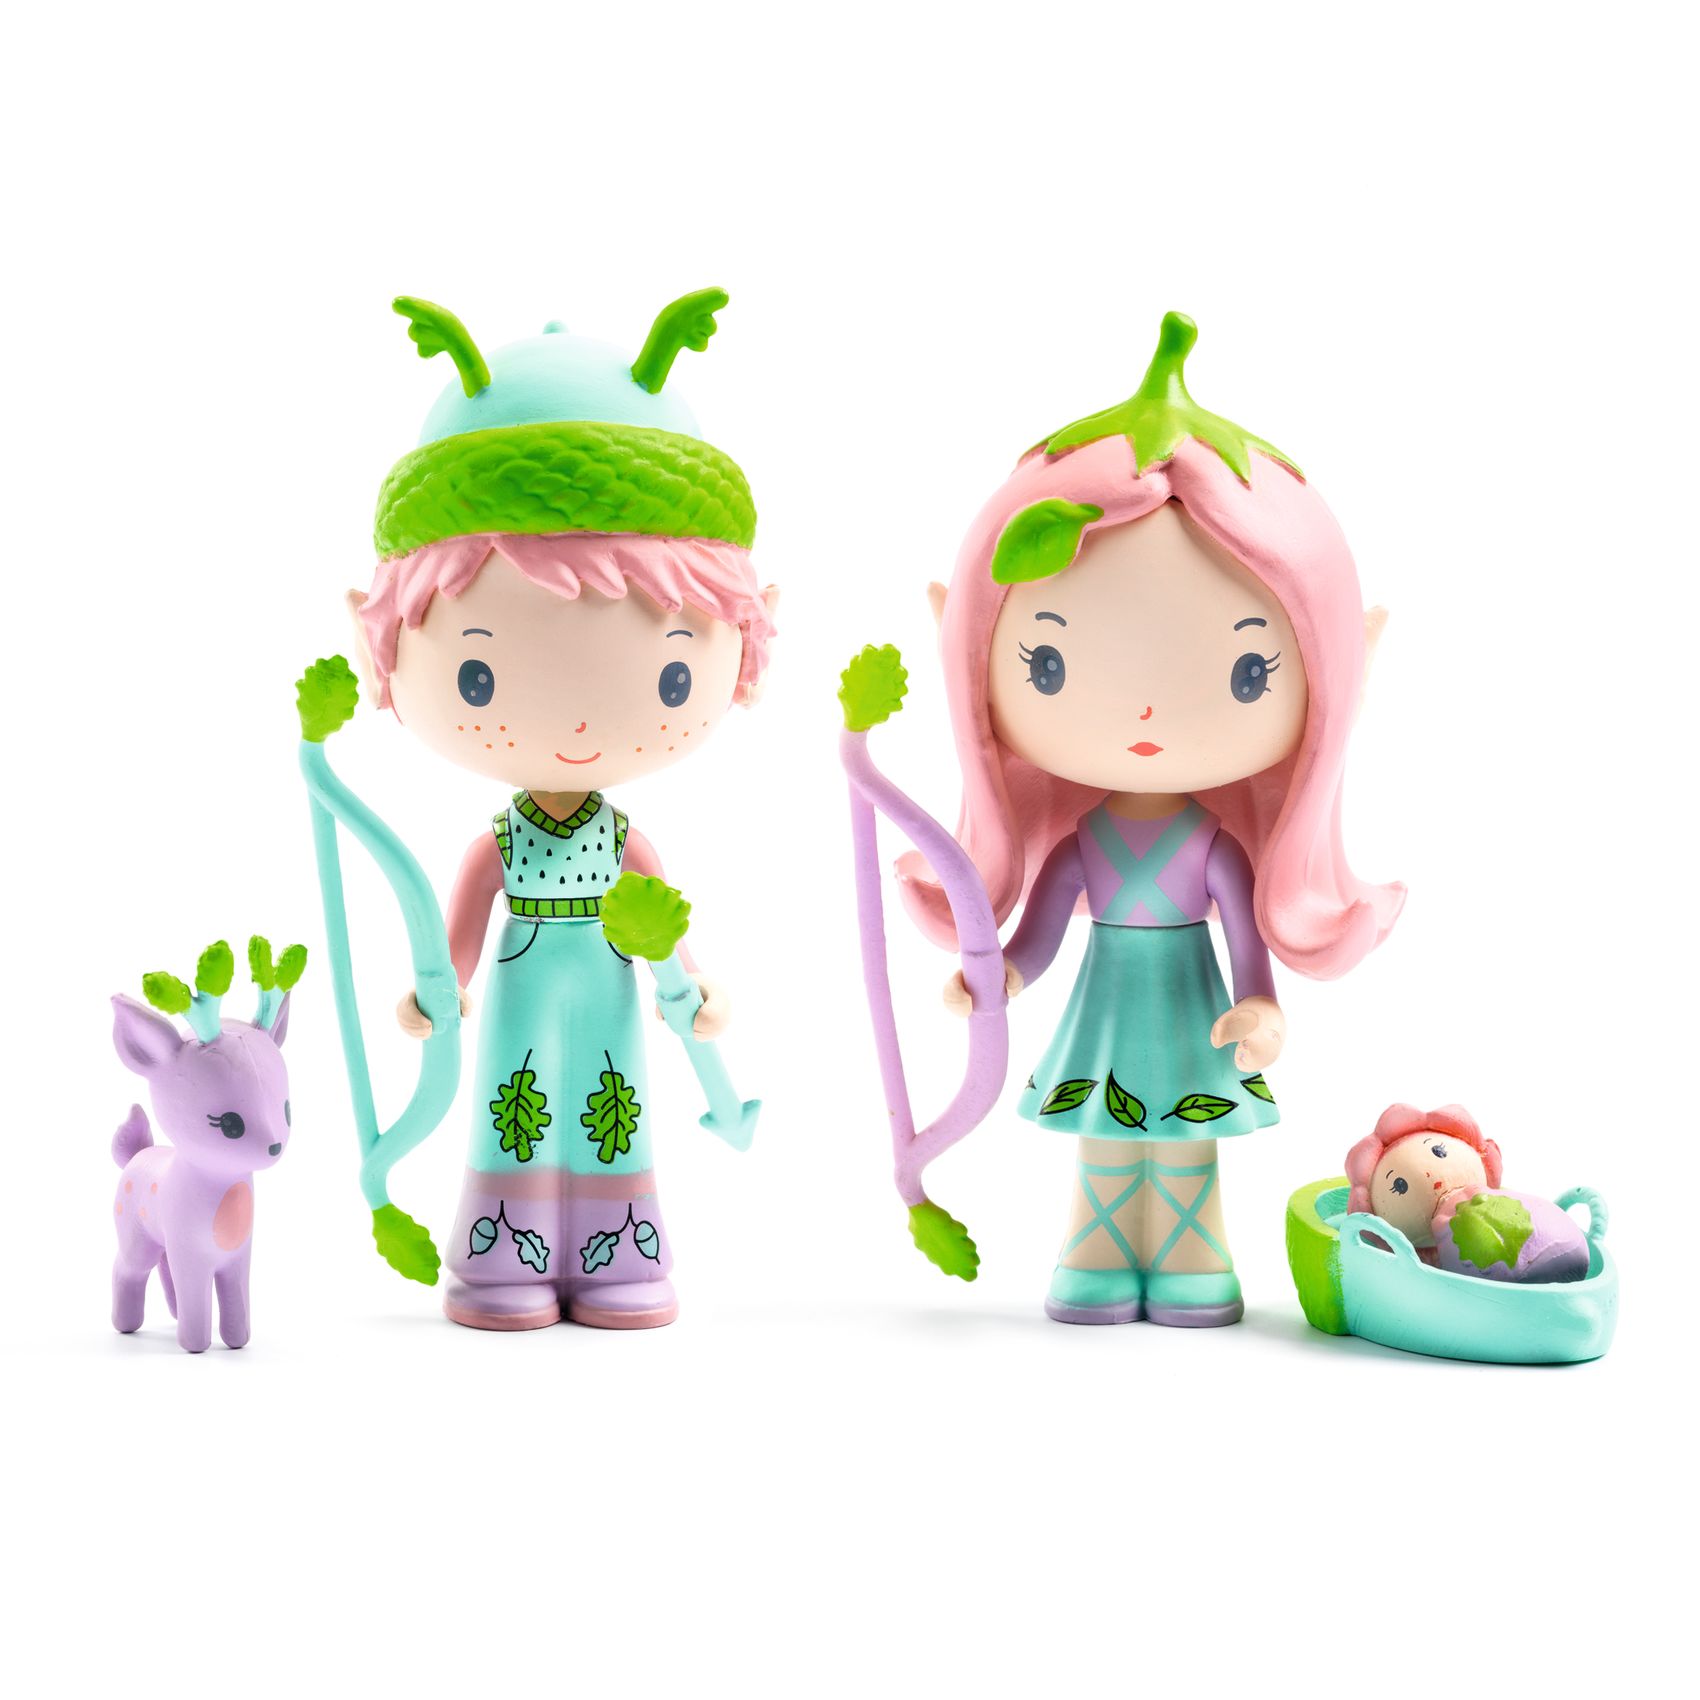 Lily & Sylvestre Tinyly figurines by Djeco